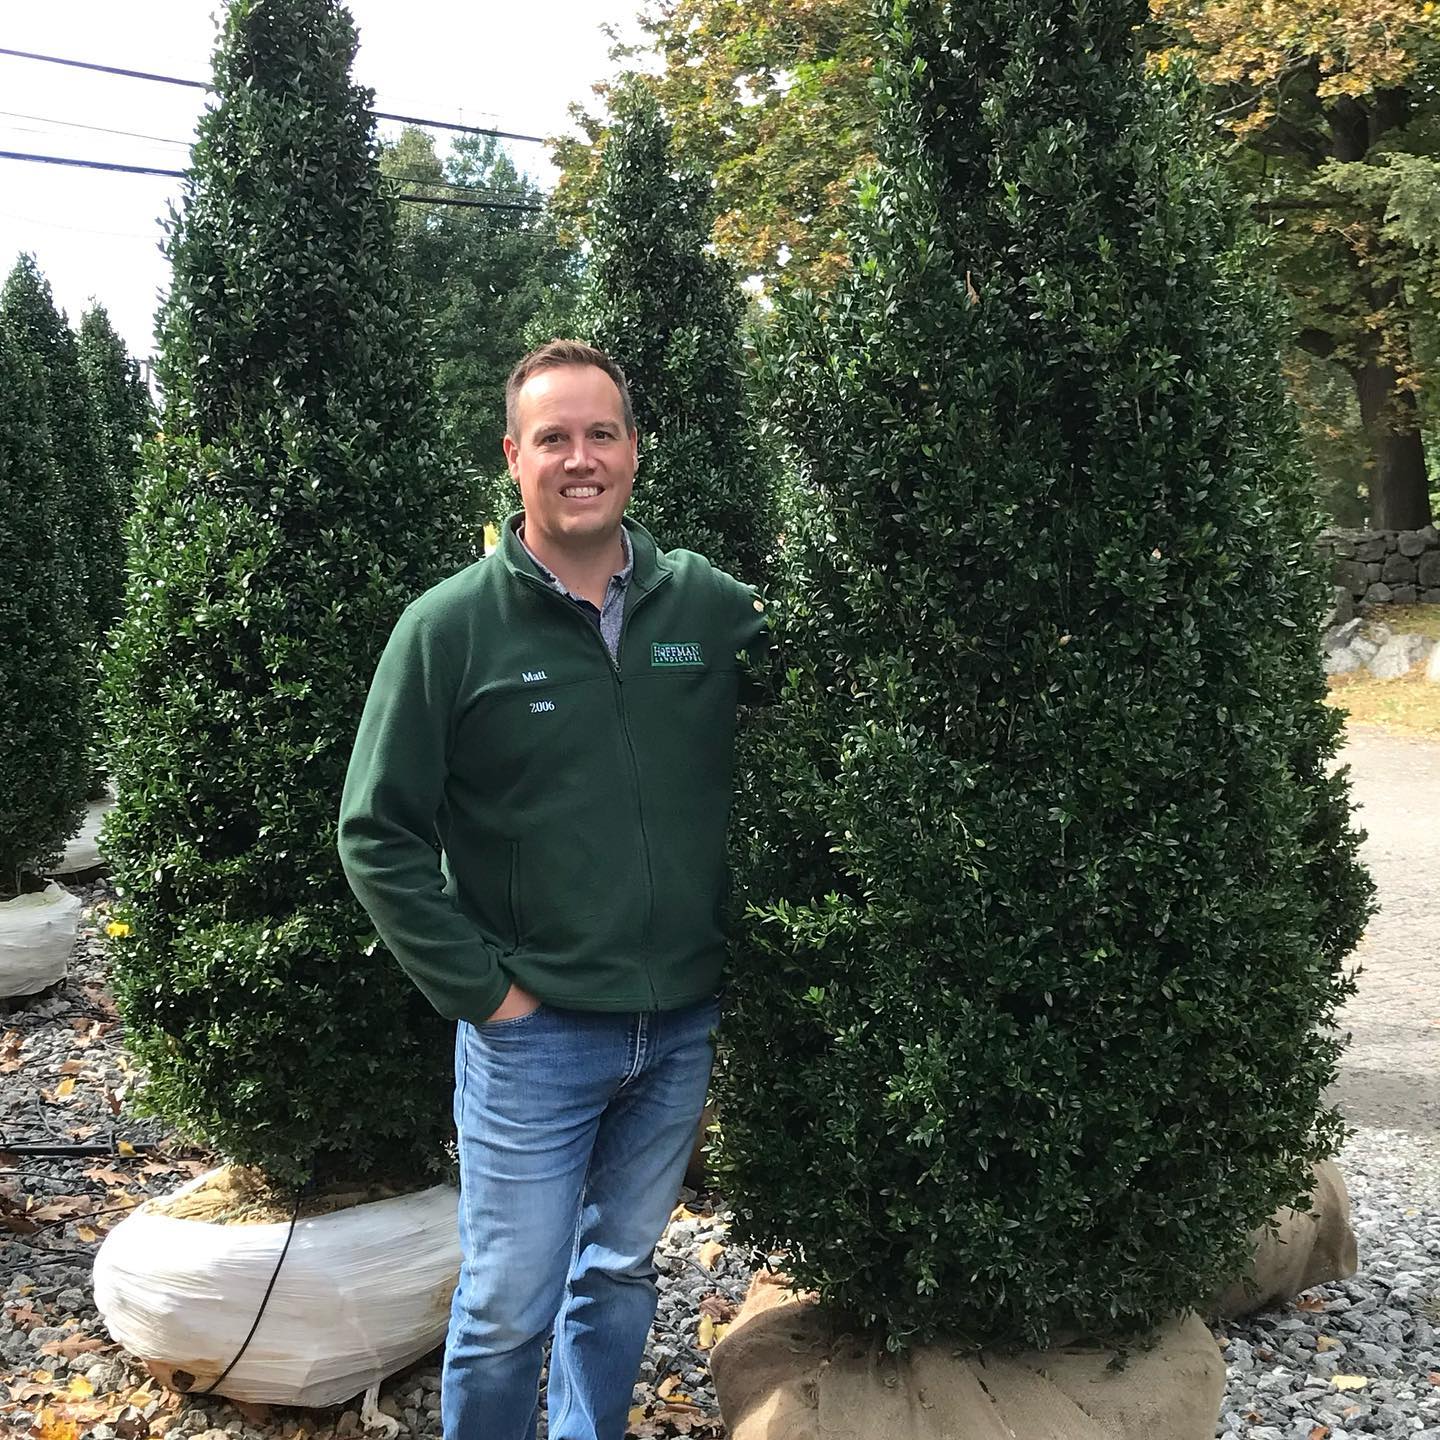 A smiling person in a green fleece jacket stands among tall, conical shrubs wrapped at the base, outdoors on a clear day.